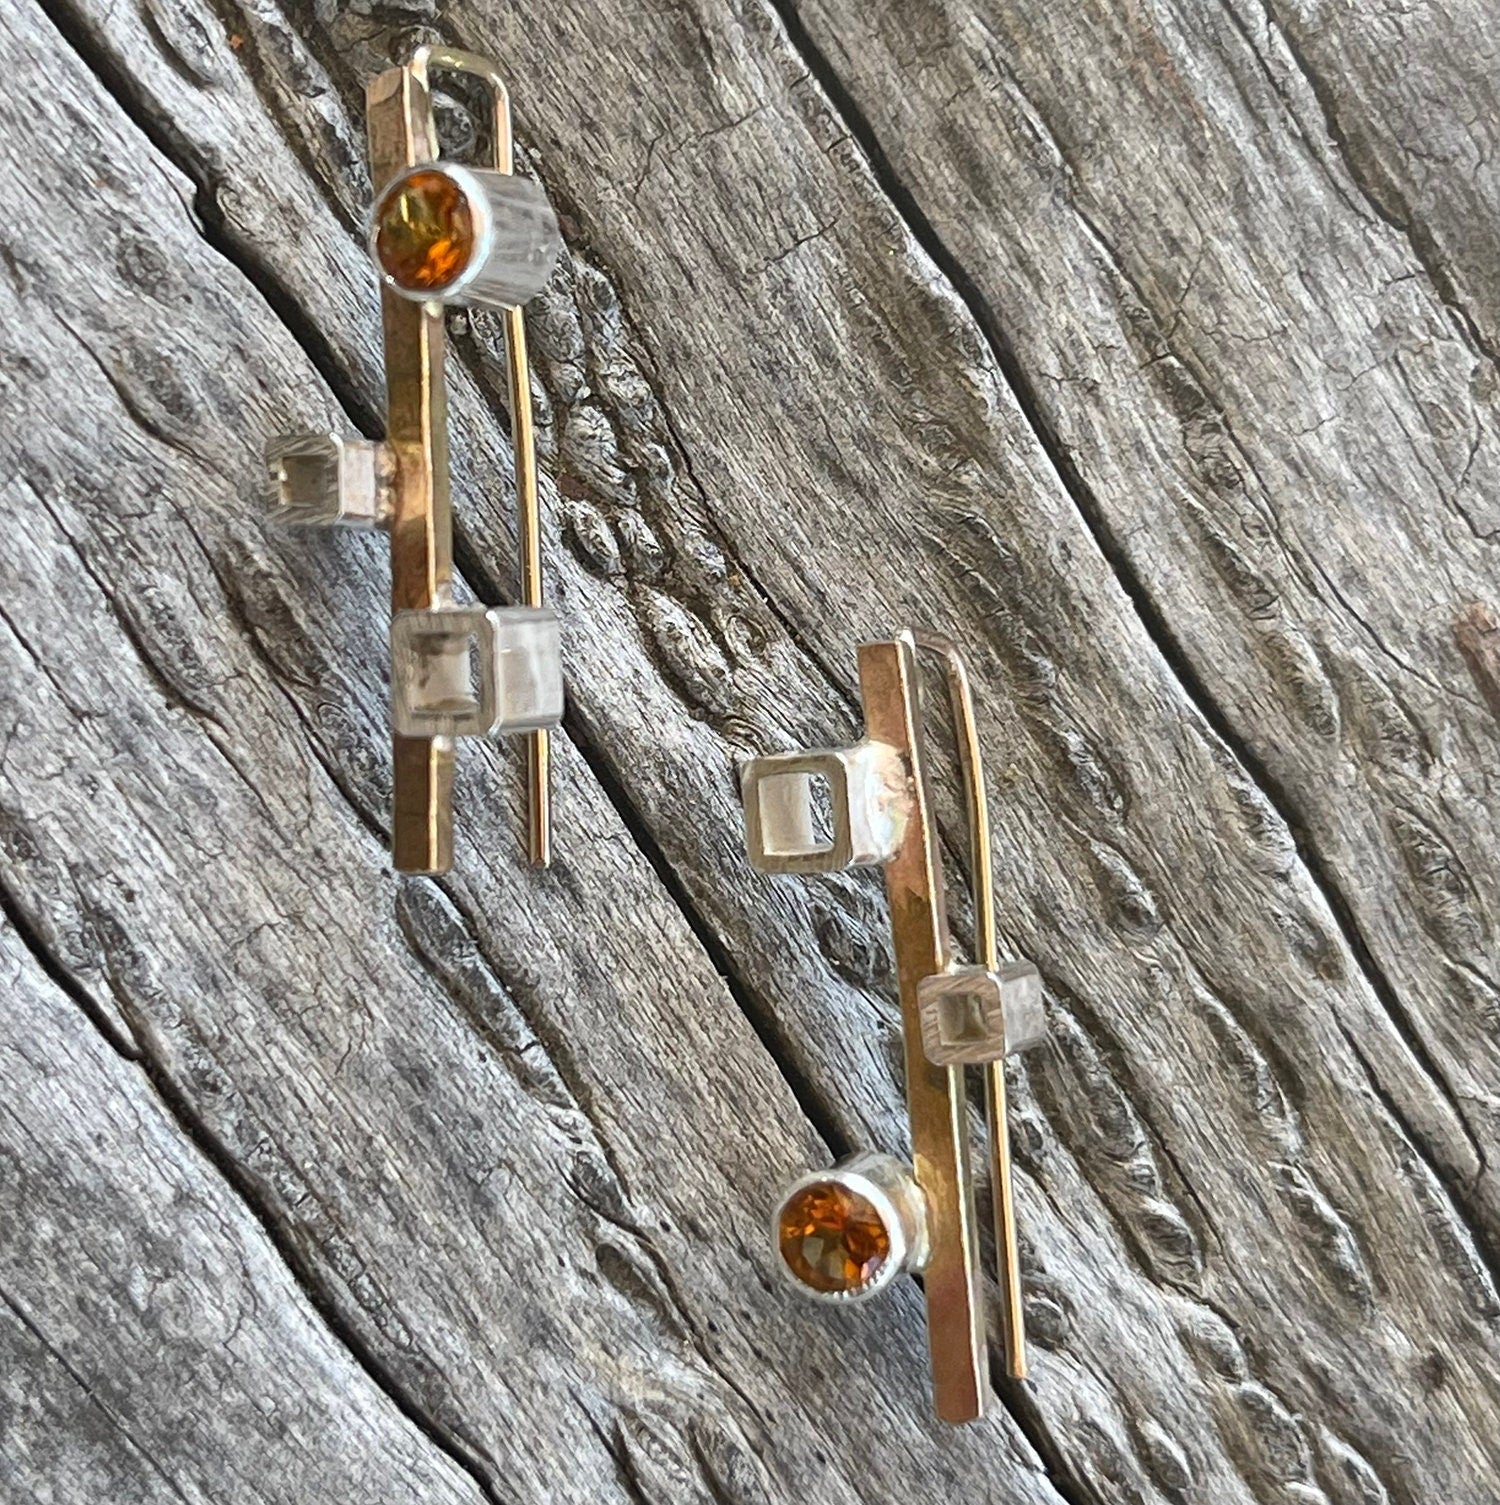 14K Gold Fill Earrings with Silver Tube Set Citrine and Silver Squares